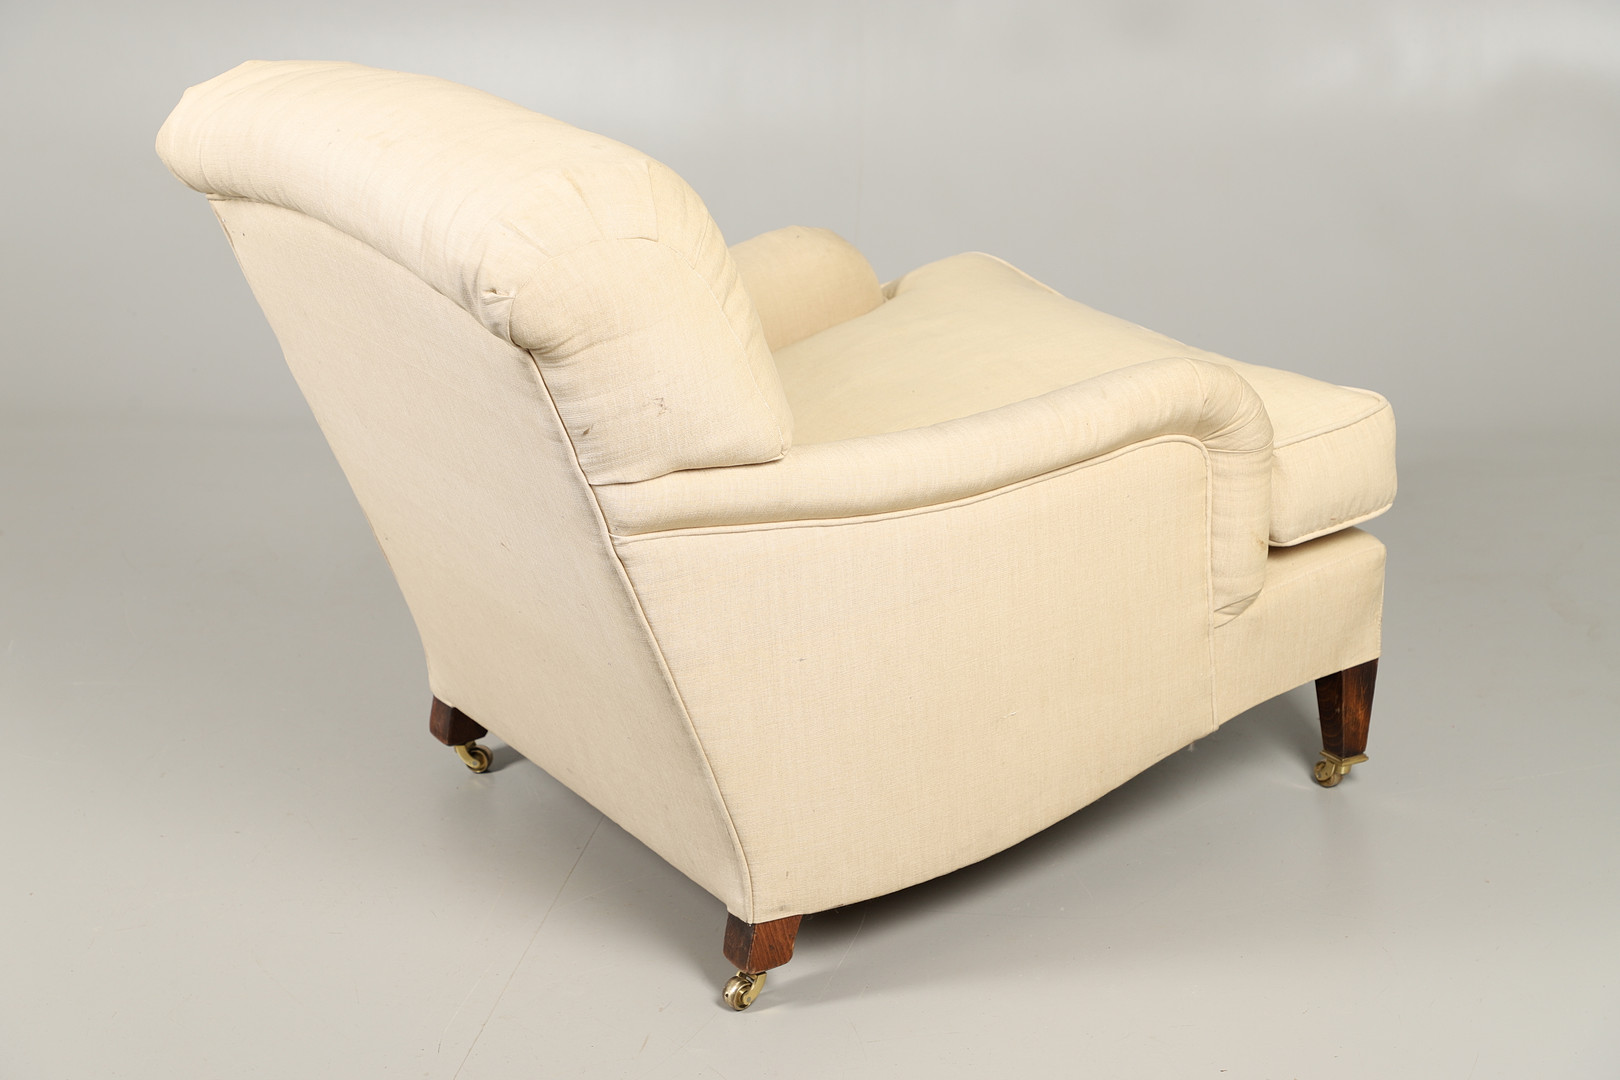 A HOWARD-STYLE DEEP SEATED ARMCHAIR. - Image 6 of 6